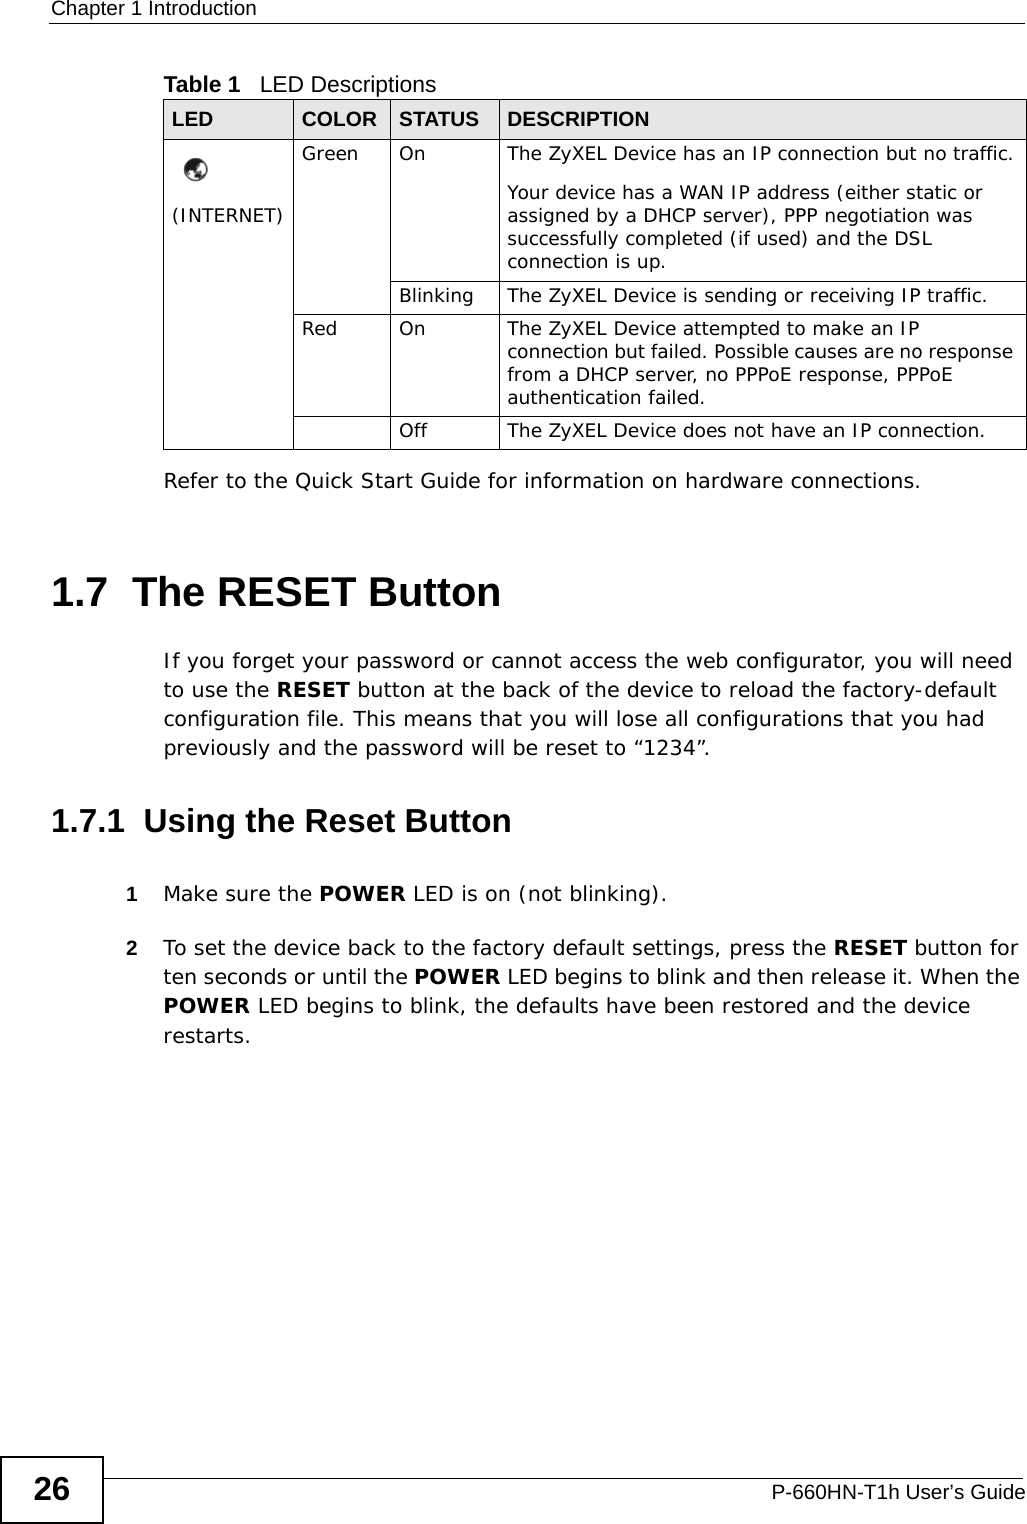 Chapter 1 IntroductionP-660HN-T1h User’s Guide26Refer to the Quick Start Guide for information on hardware connections. 1.7  The RESET ButtonIf you forget your password or cannot access the web configurator, you will need to use the RESET button at the back of the device to reload the factory-default configuration file. This means that you will lose all configurations that you had previously and the password will be reset to “1234”. 1.7.1  Using the Reset Button1Make sure the POWER LED is on (not blinking).2To set the device back to the factory default settings, press the RESET button for ten seconds or until the POWER LED begins to blink and then release it. When the POWER LED begins to blink, the defaults have been restored and the device restarts.(INTERNET)Green On The ZyXEL Device has an IP connection but no traffic.Your device has a WAN IP address (either static or assigned by a DHCP server), PPP negotiation was successfully completed (if used) and the DSL connection is up.Blinking The ZyXEL Device is sending or receiving IP traffic.Red On The ZyXEL Device attempted to make an IP connection but failed. Possible causes are no response from a DHCP server, no PPPoE response, PPPoE authentication failed.Off The ZyXEL Device does not have an IP connection.Table 1   LED DescriptionsLED COLOR STATUS DESCRIPTION